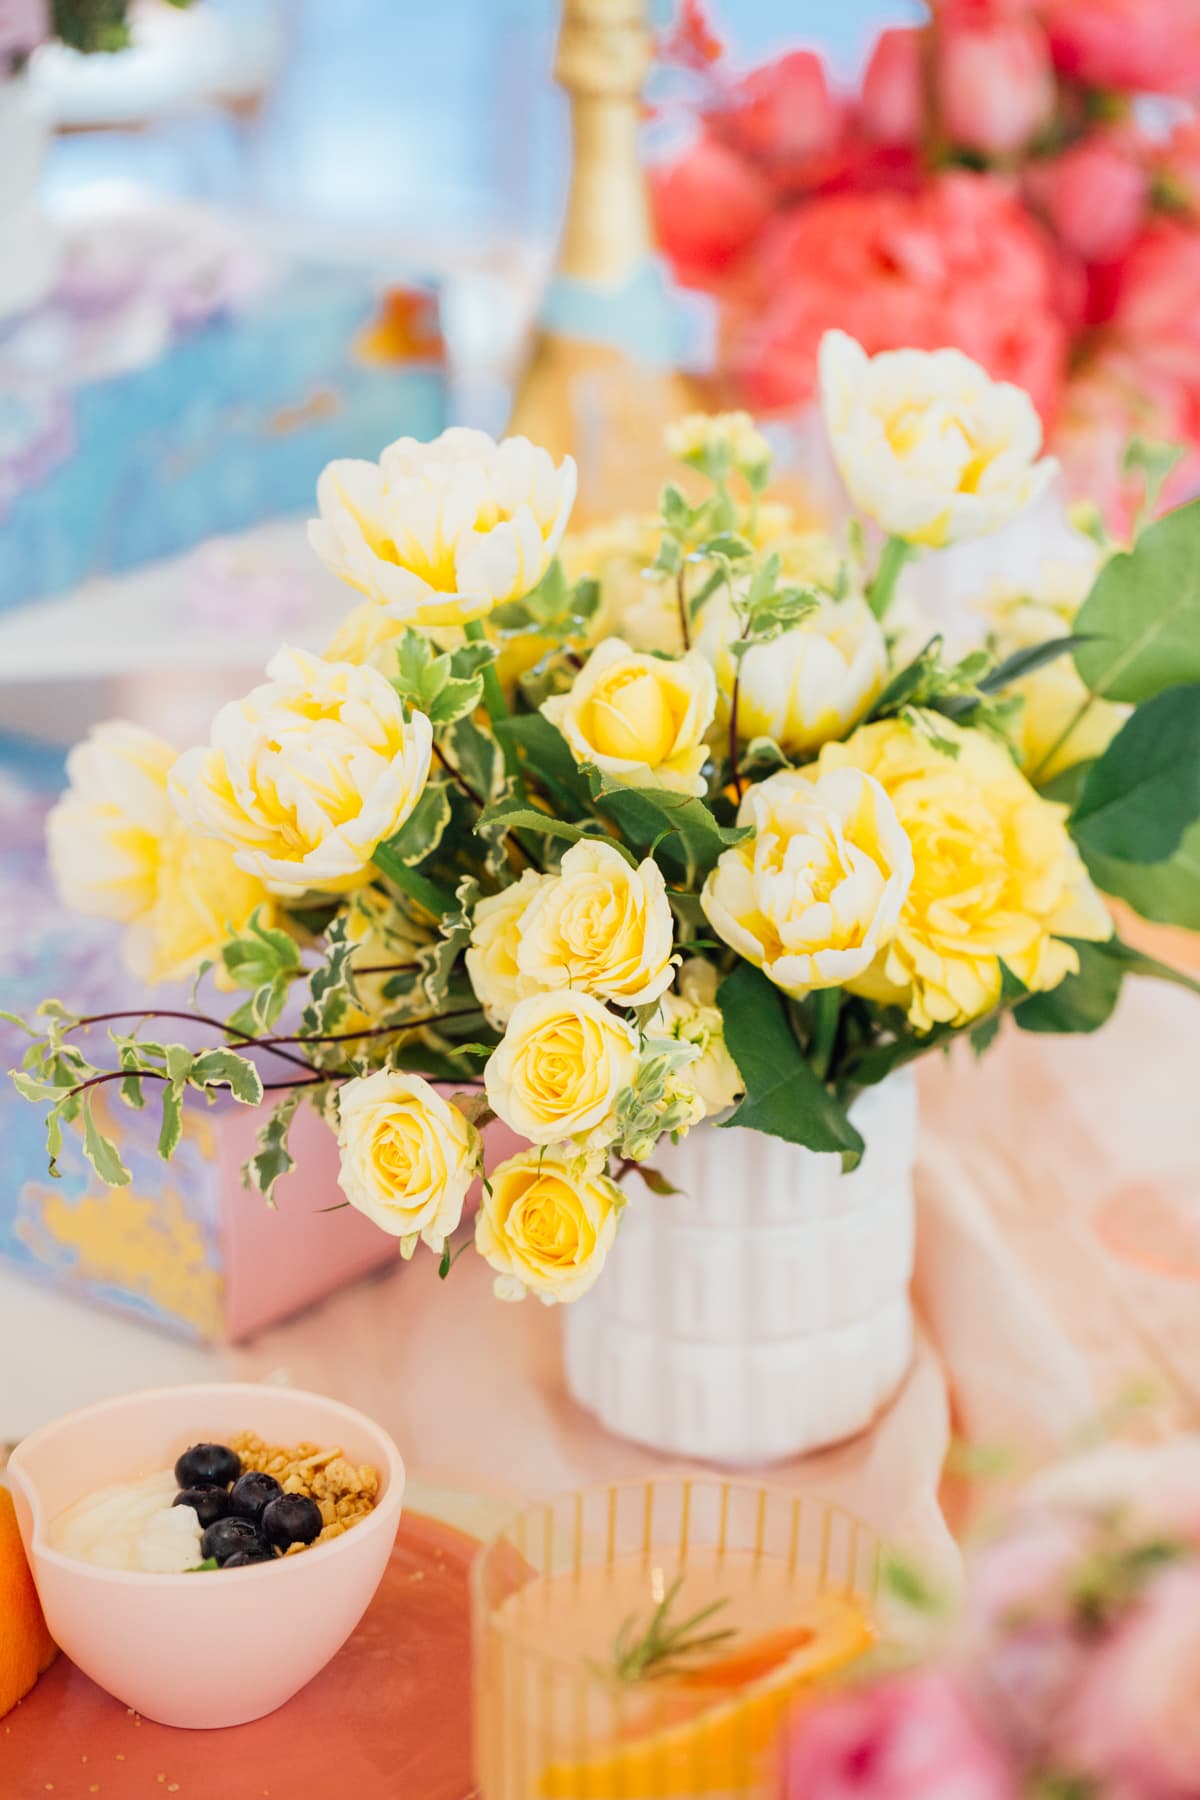 color blocked flowers - A Perfectly Pastel Easter Table Idea by top Houston lifestyle blogger Ashley Rose of Sugar & Cloth #diy #tablescape #ideas #easter #pastel #party #decorations #brunch #bridalshower #bridal #shower #baby